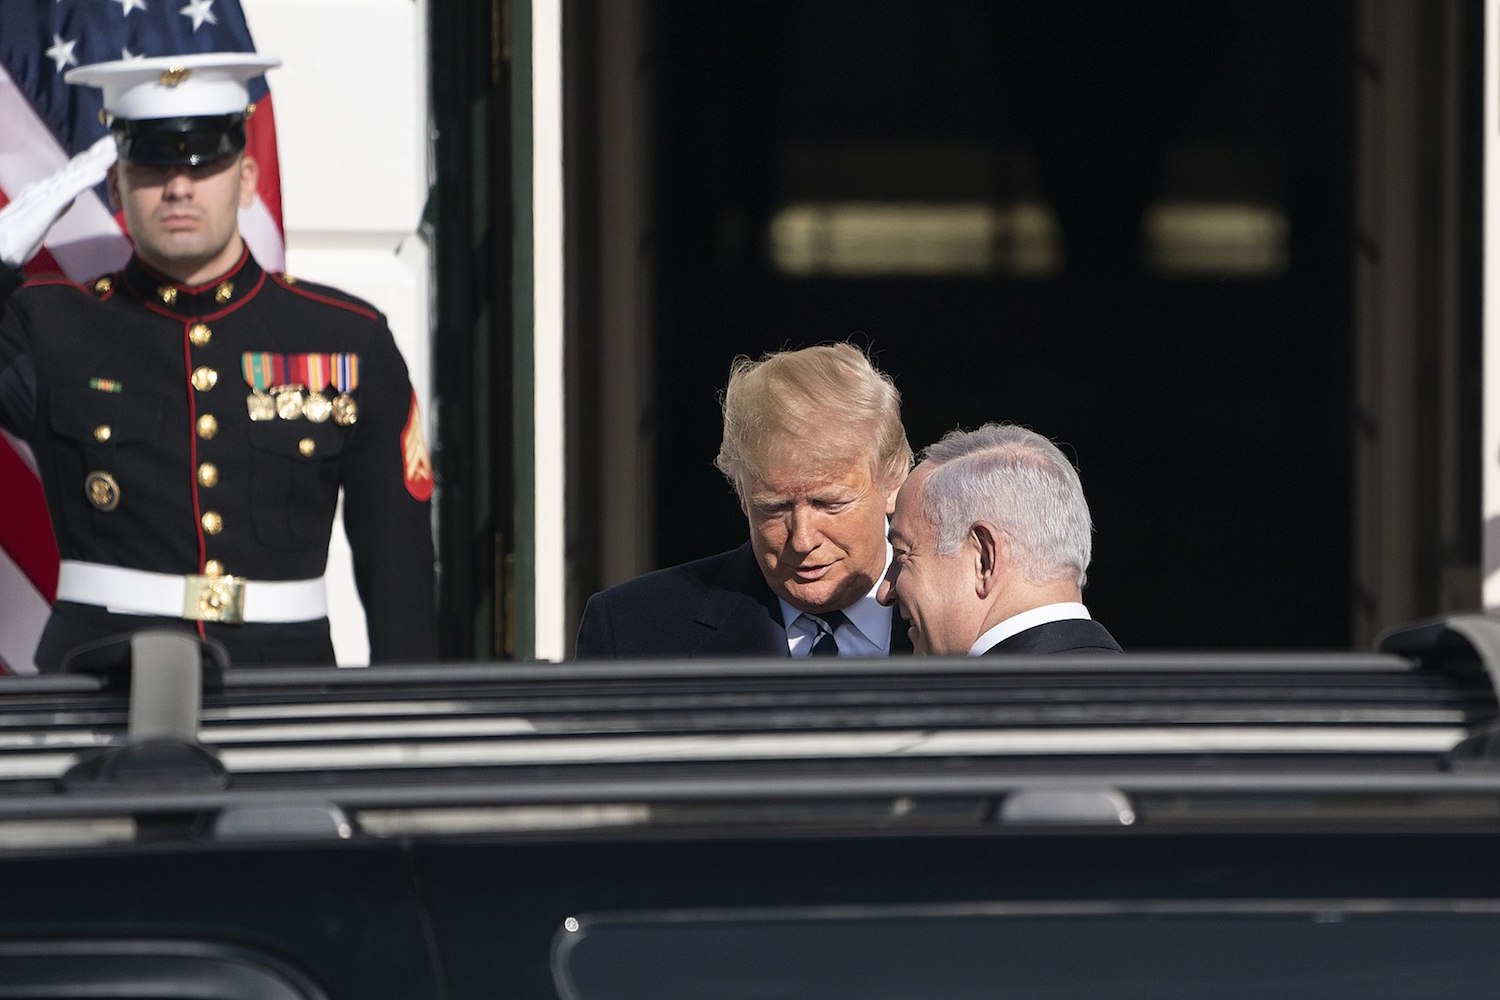 President Trump greets Israeli Prime Minister Netanyahu upon his arrival to the South Portico of the White House, January 27, 2020. (Joyce N. Boghosian/White House Photo)